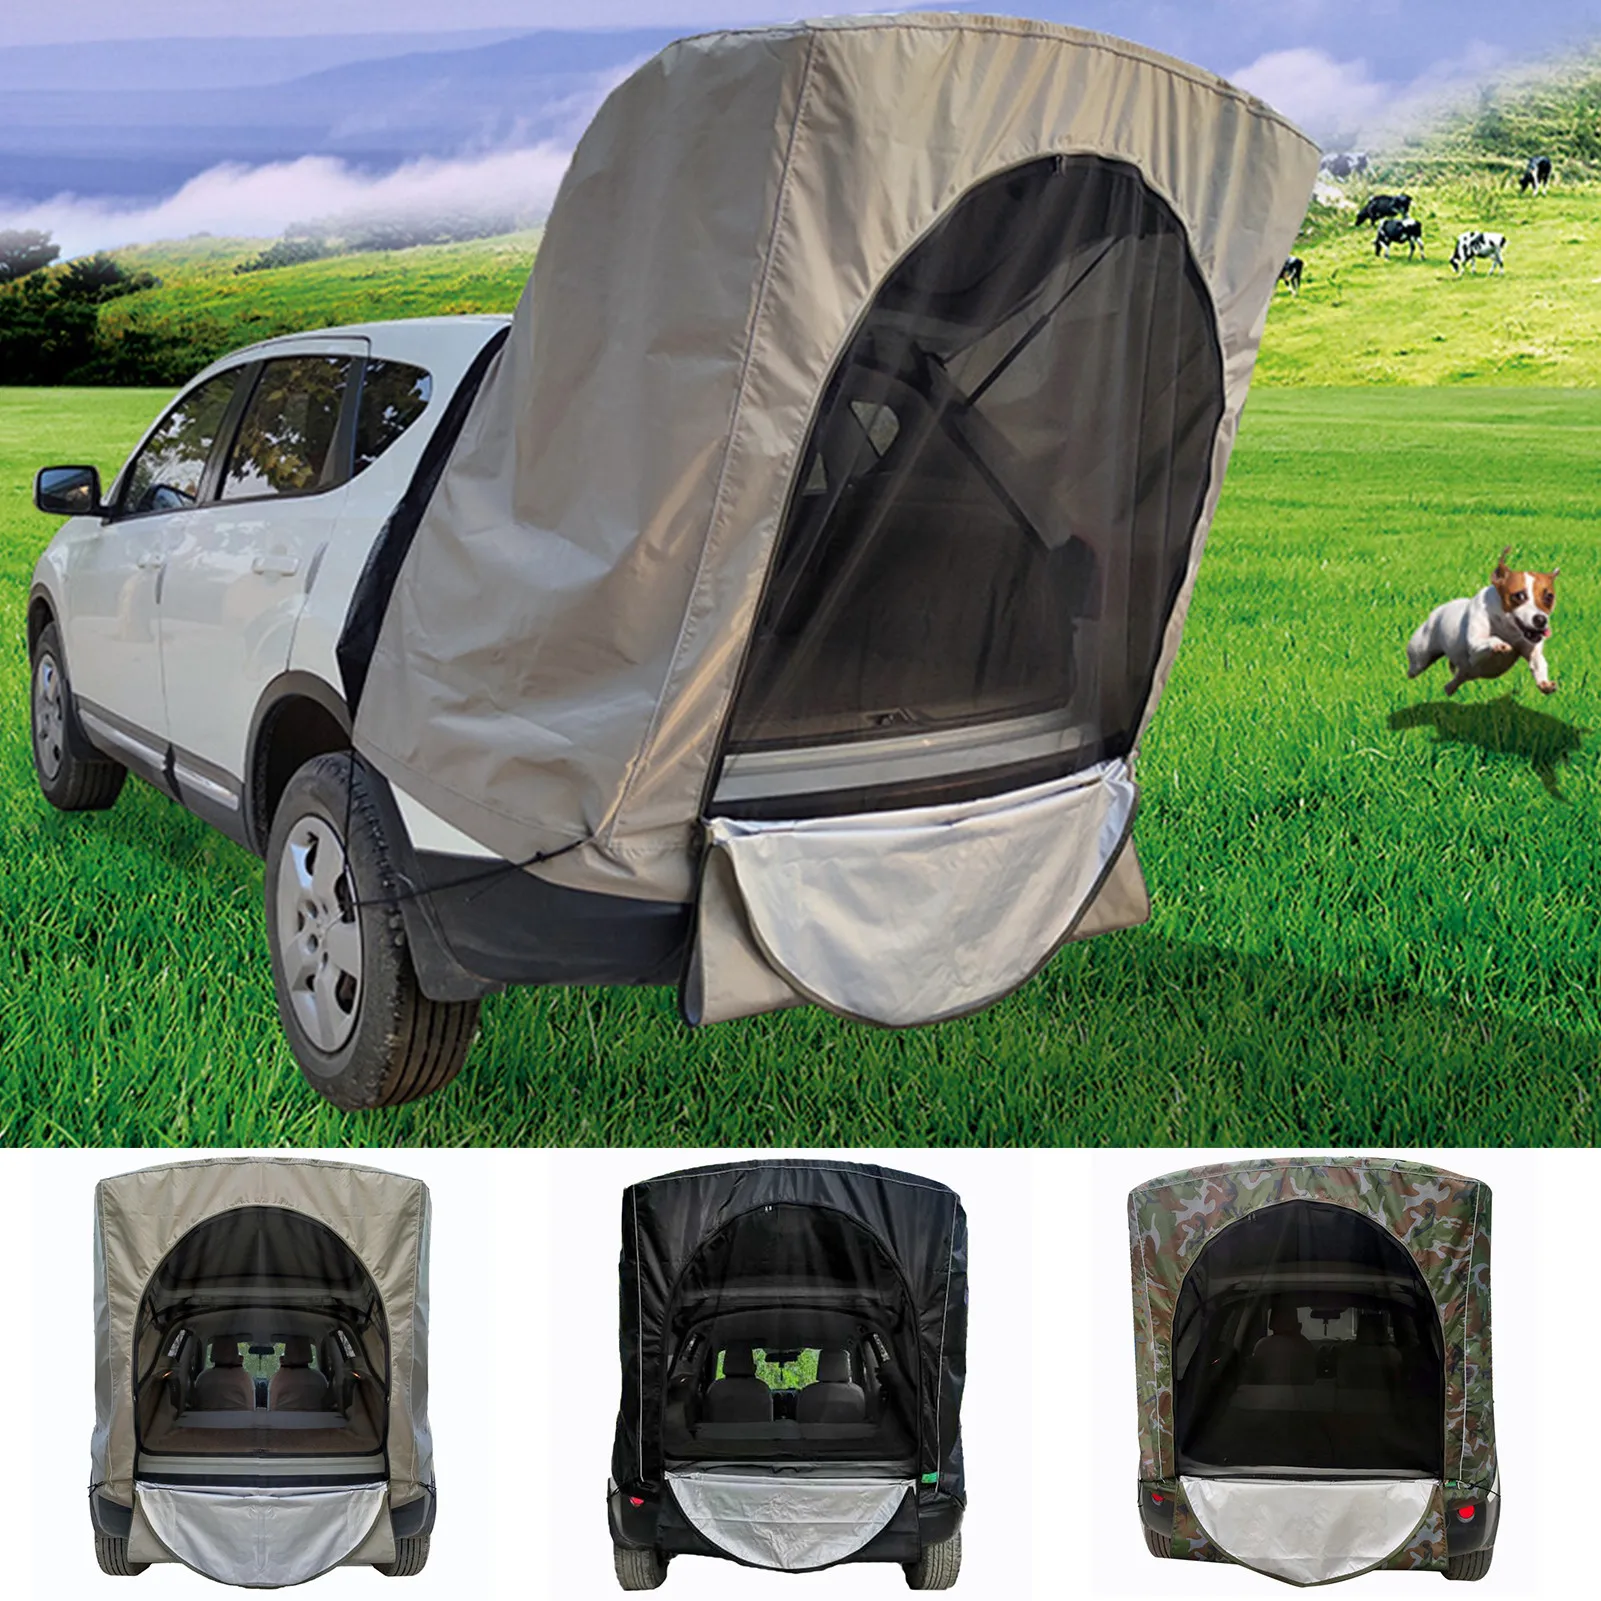 Car Roof Tent Car Awning Outdoor Equipment Camping Tent Canopy Tail Ledger Picnic Awning For Skoda For Mazda For Honda For Jeep